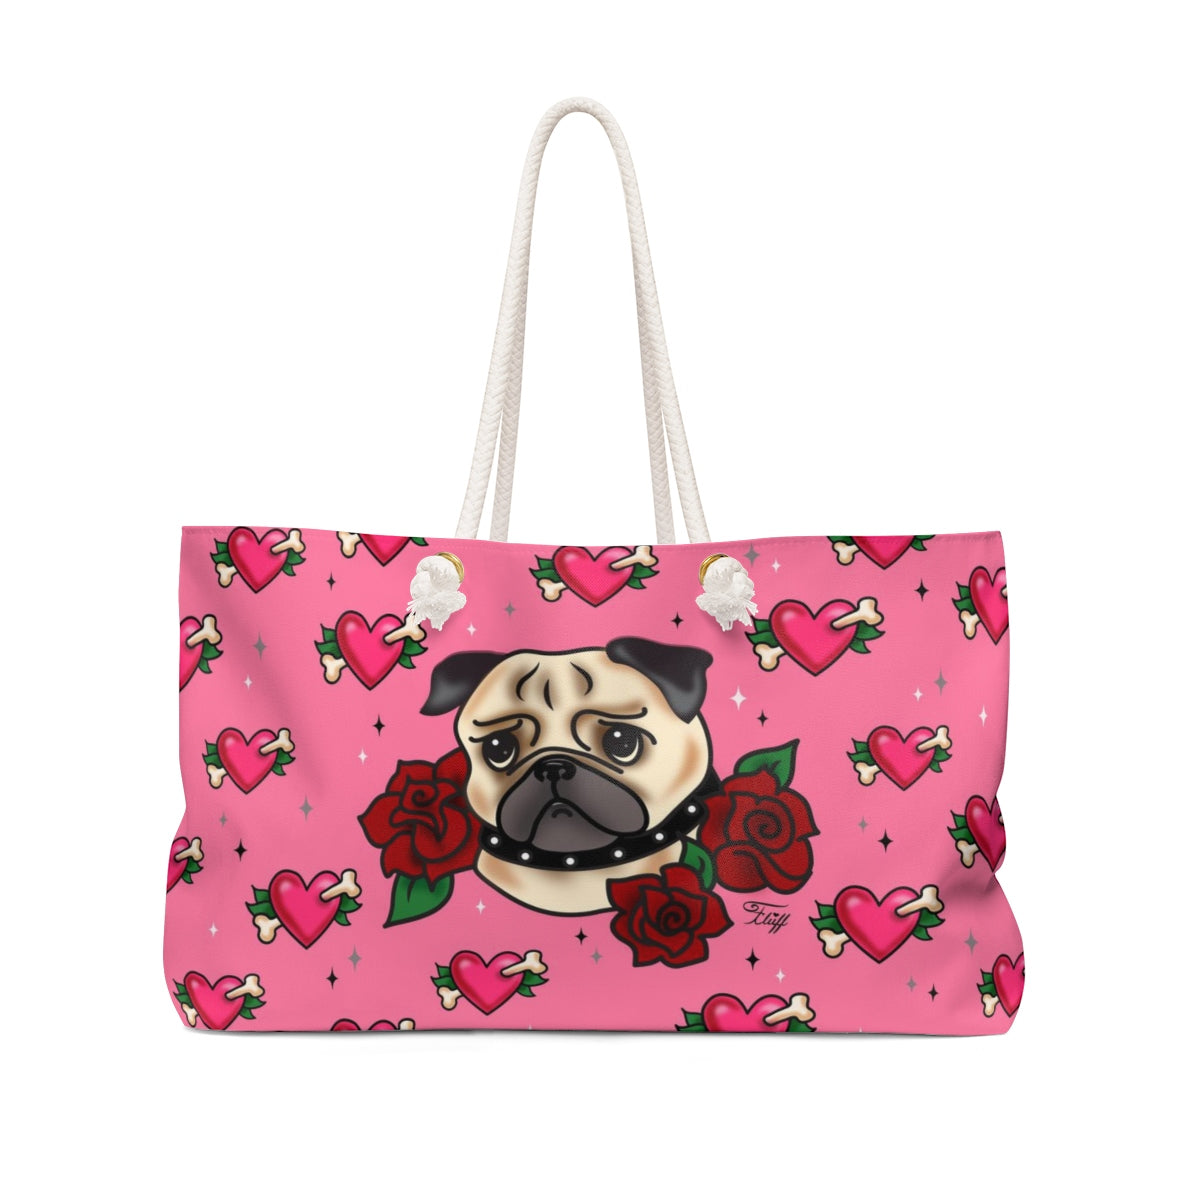 Pug Tote Bag Option to Personalize Pug Lover Gift Colorful Pug Art Tote Pug  Dog Totes Pug Gifts Pug Gifts for Women - Etsy